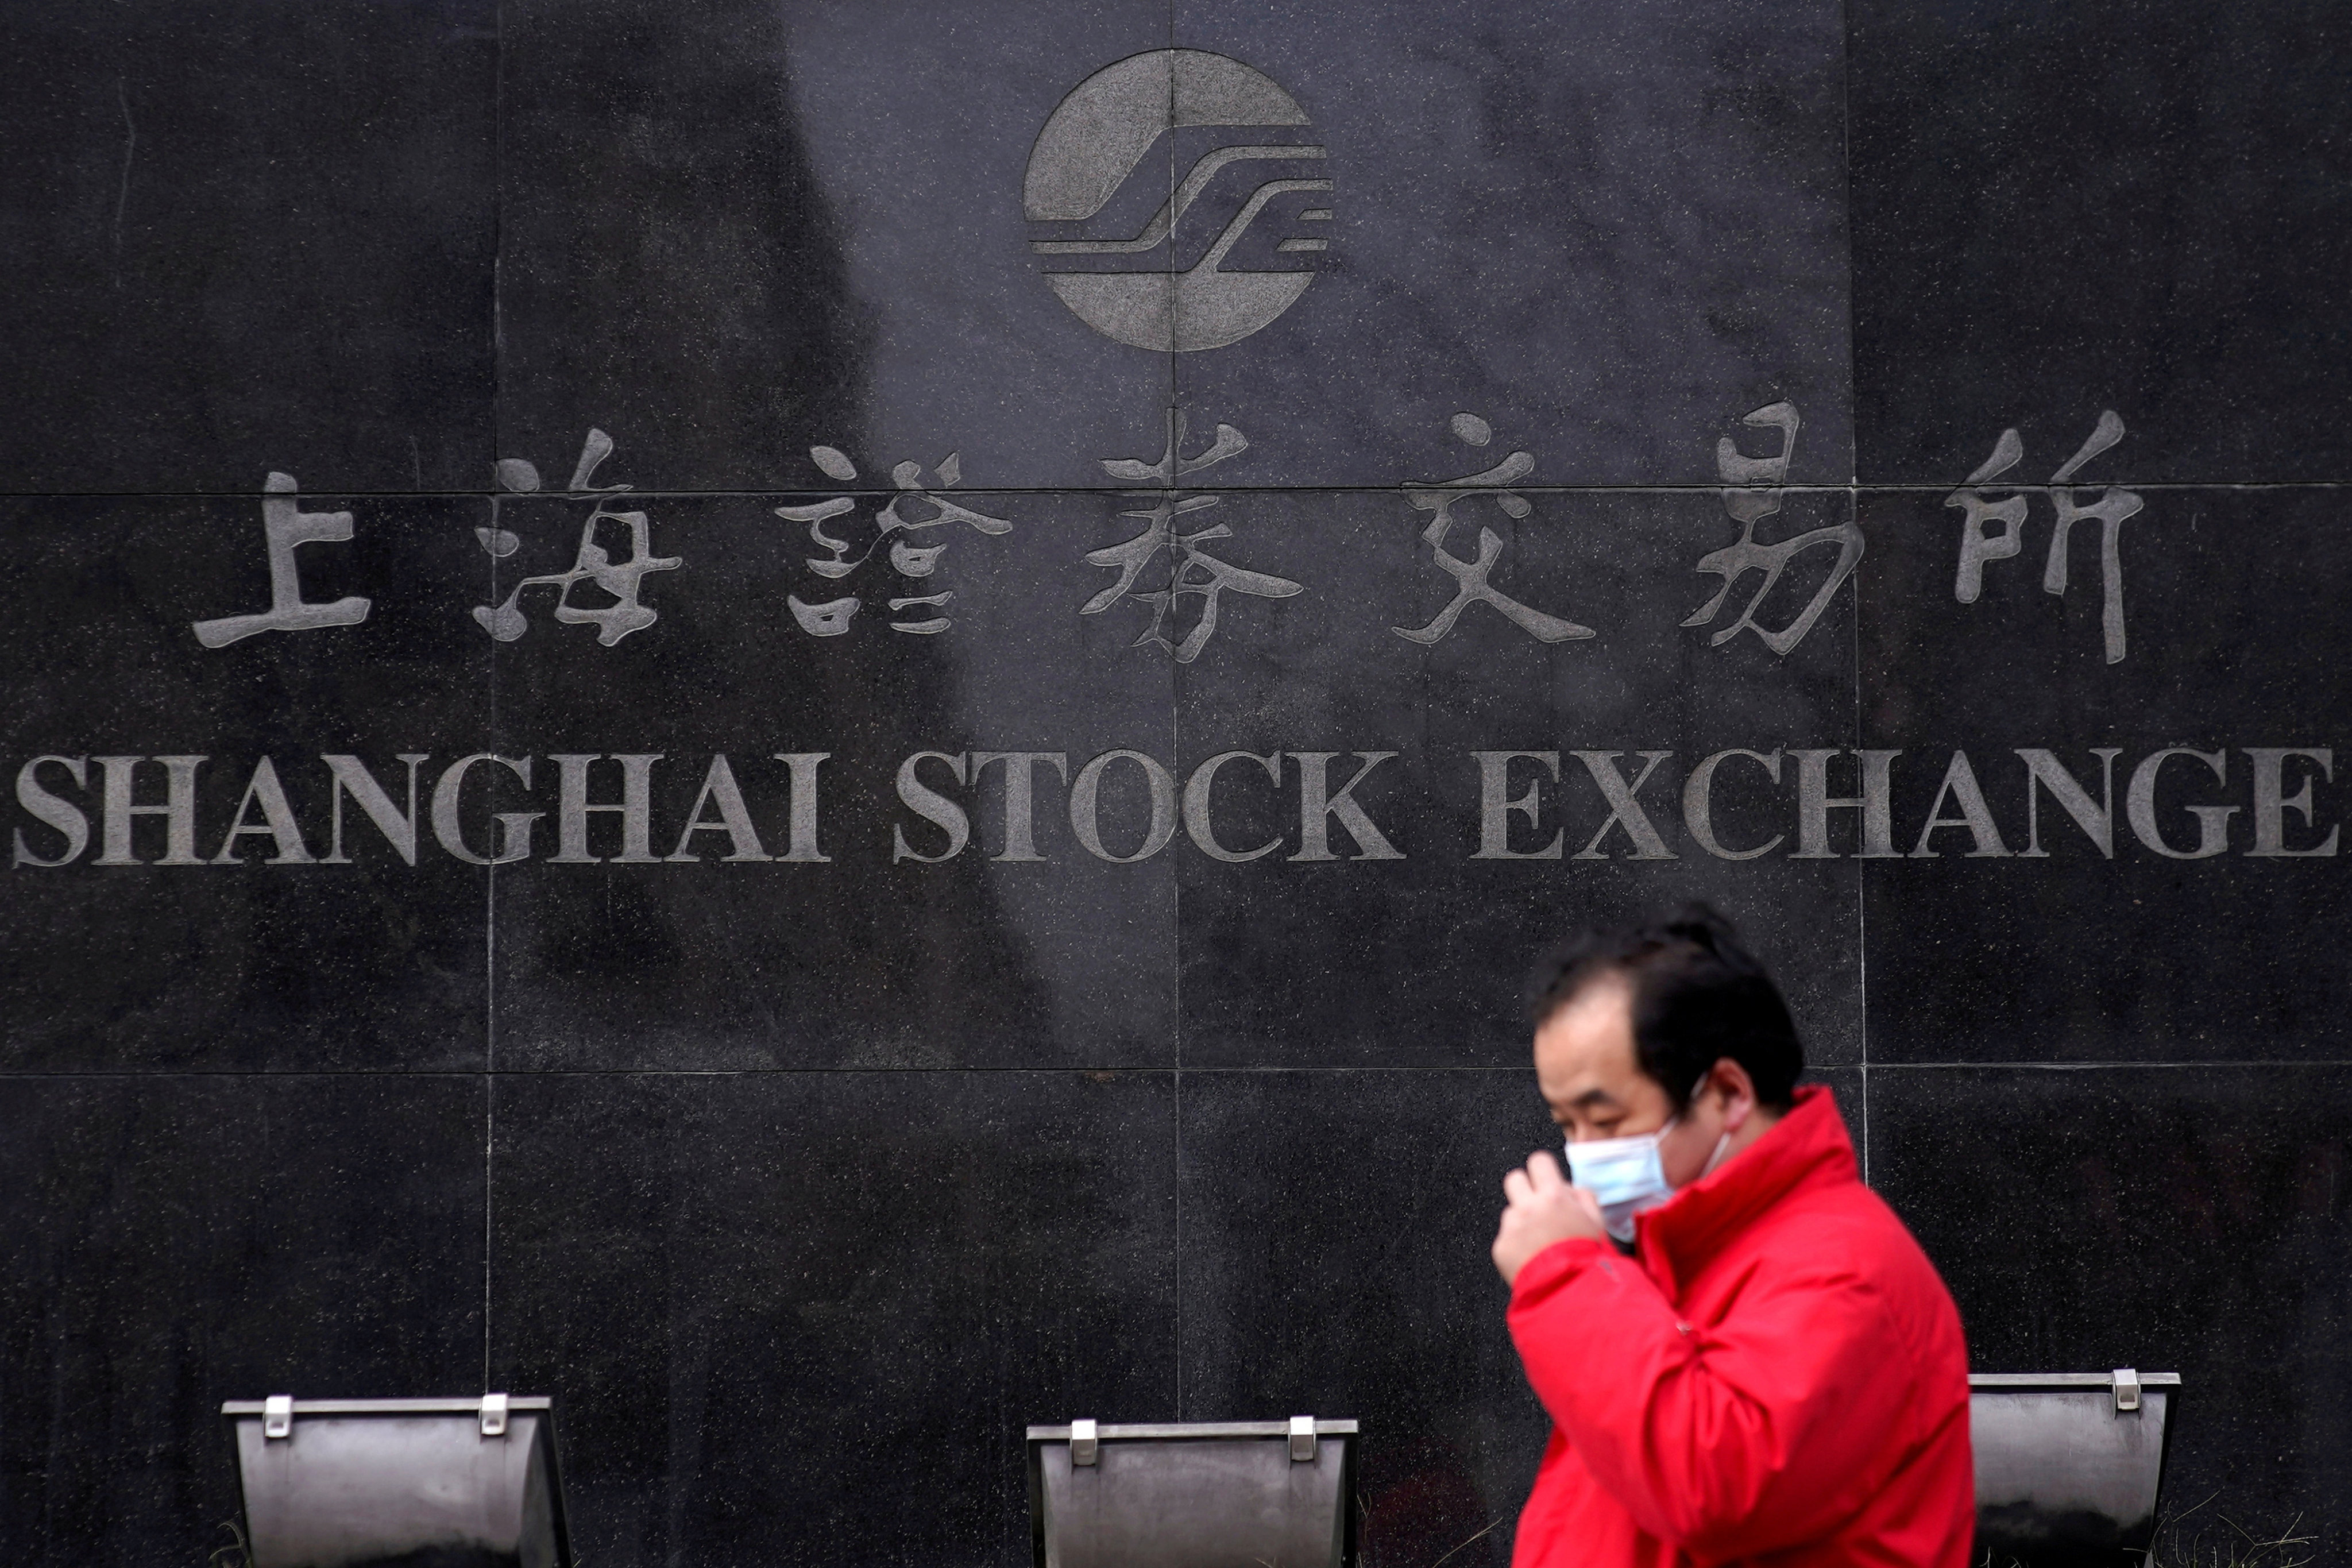 The Shanghai Stock Exchange is aiming to boost the valuation of state-backed banks to help support the nation’s economic recovery. Photo: Reuters